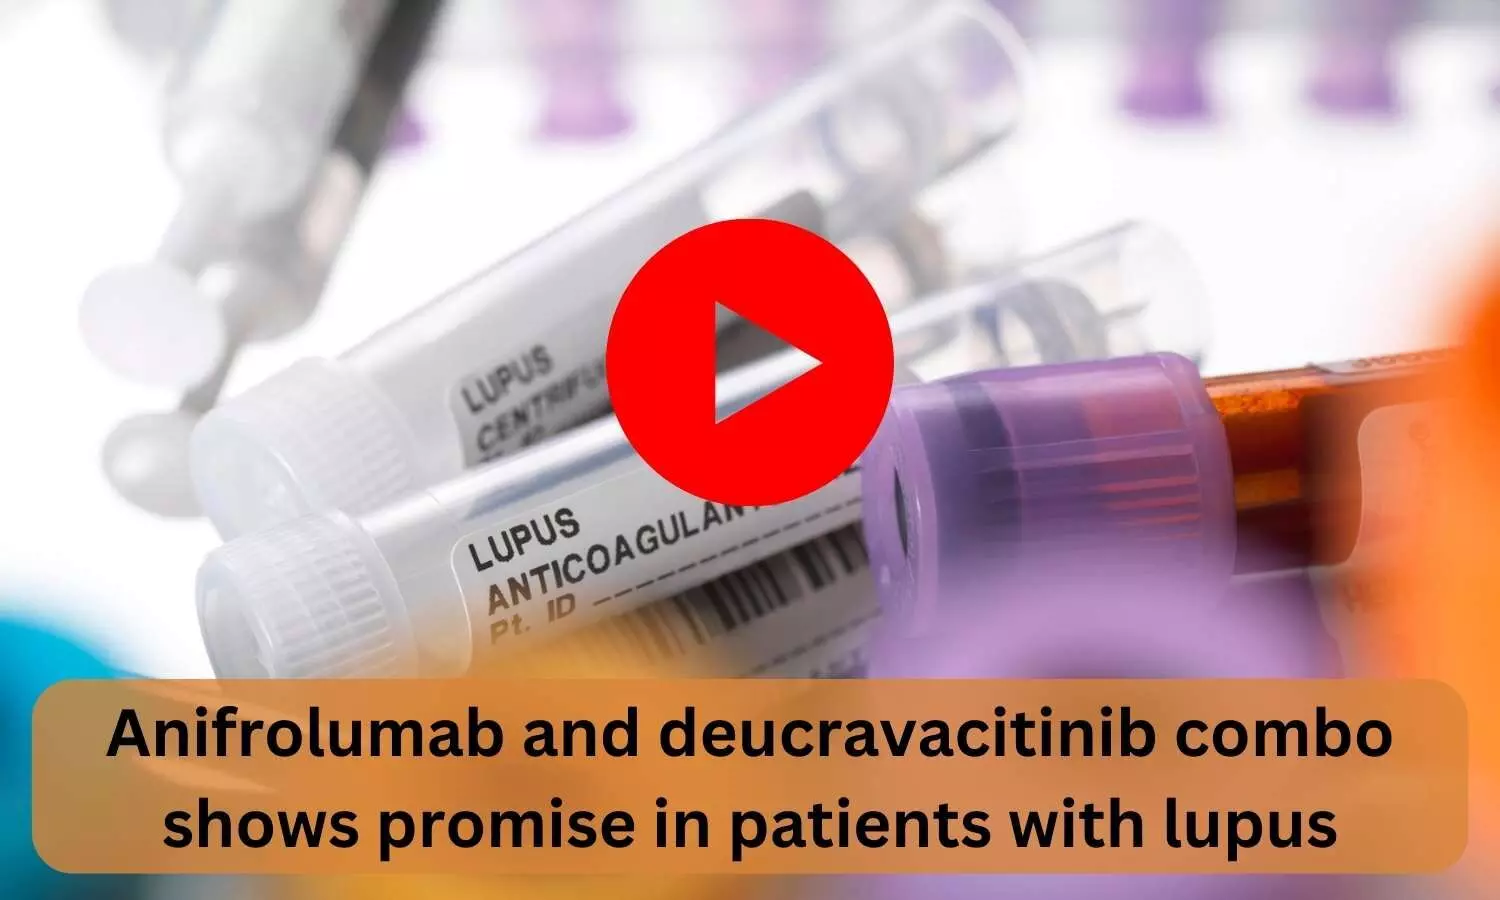 Anifrolumab and deucravacitinib combo shows promise in patients with lupus